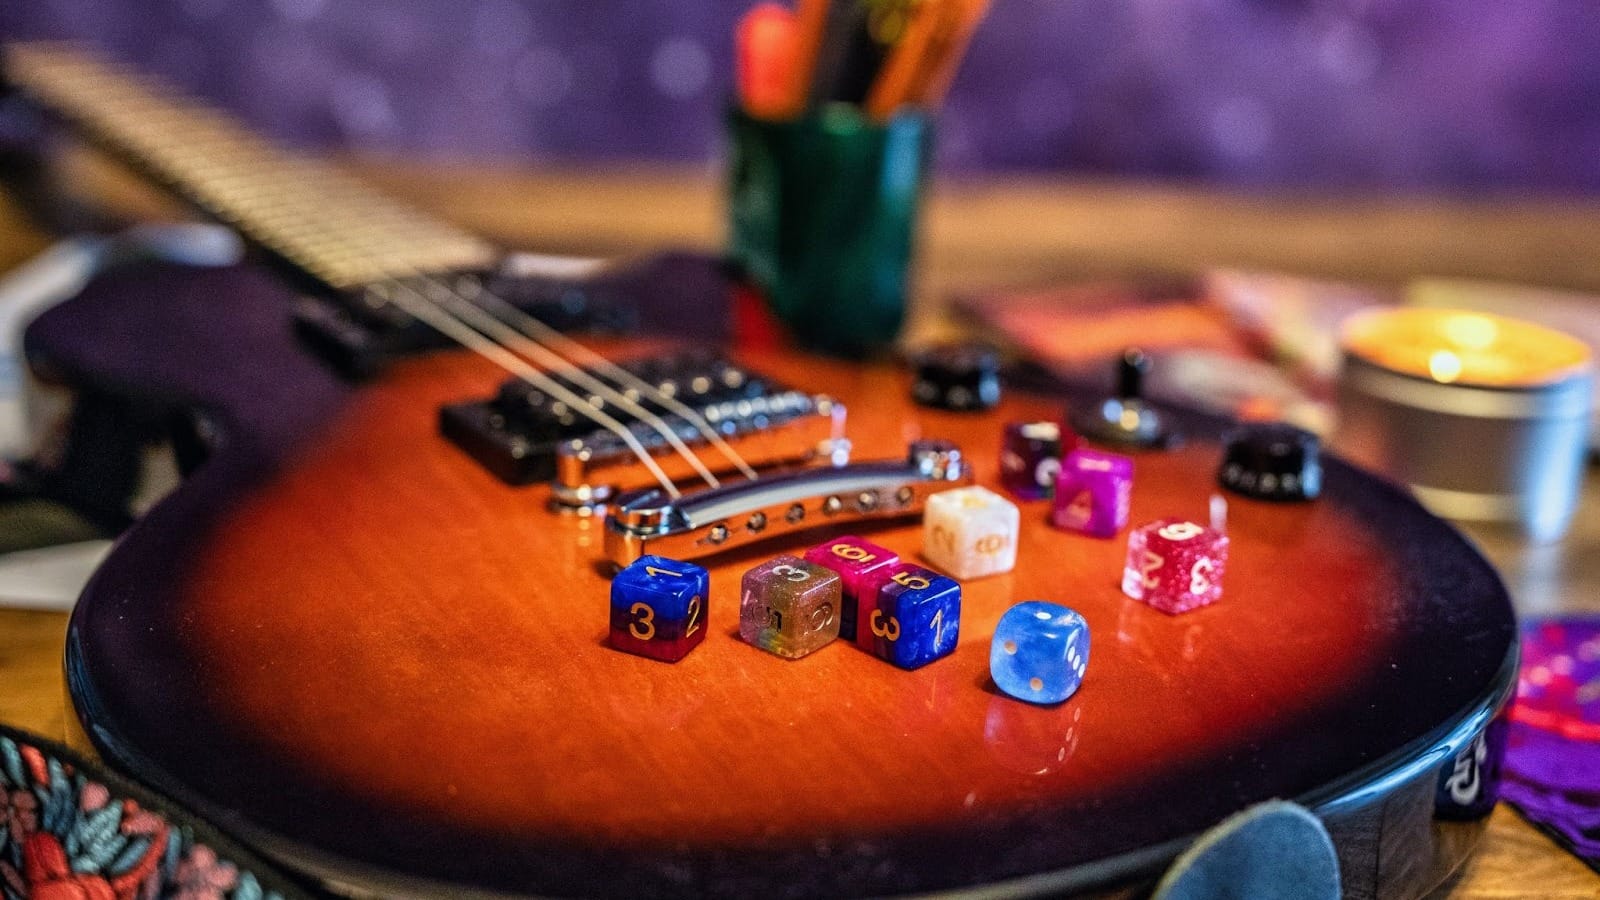 A colorful pile of six-sided dice sit atop an electric guitar.